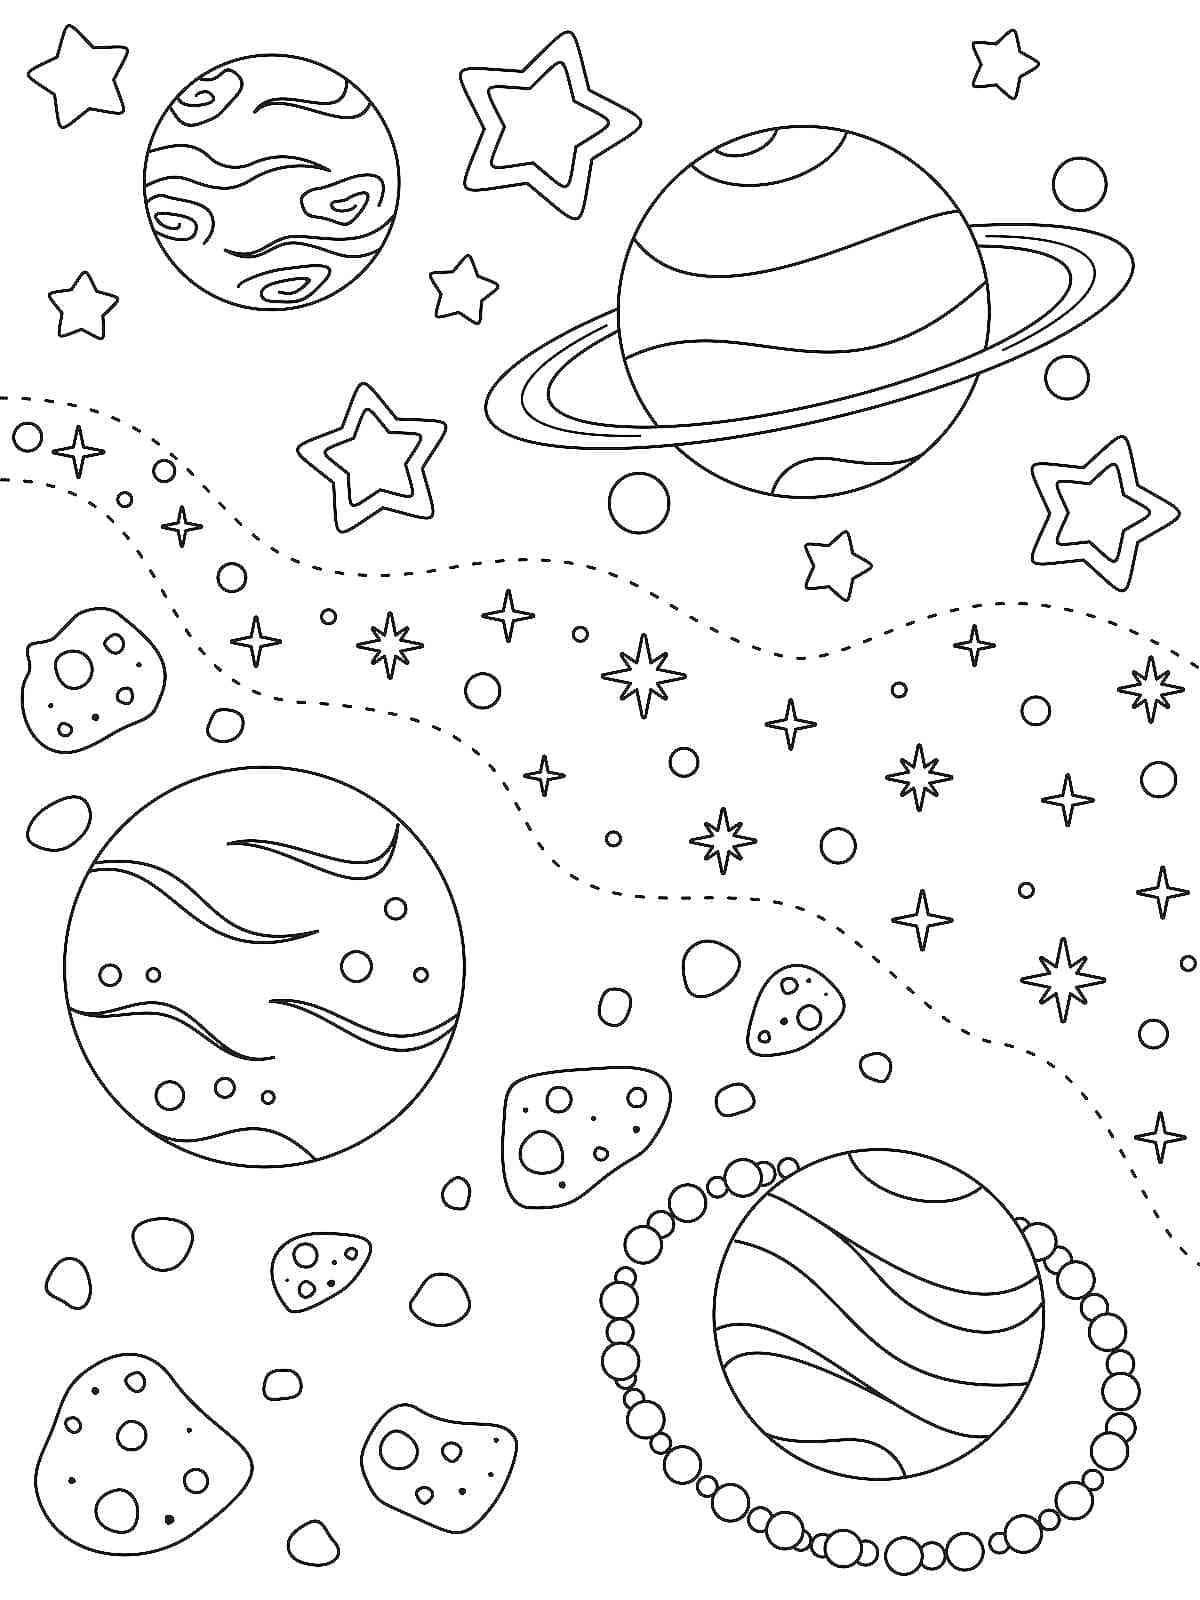 Outer space to print coloring page